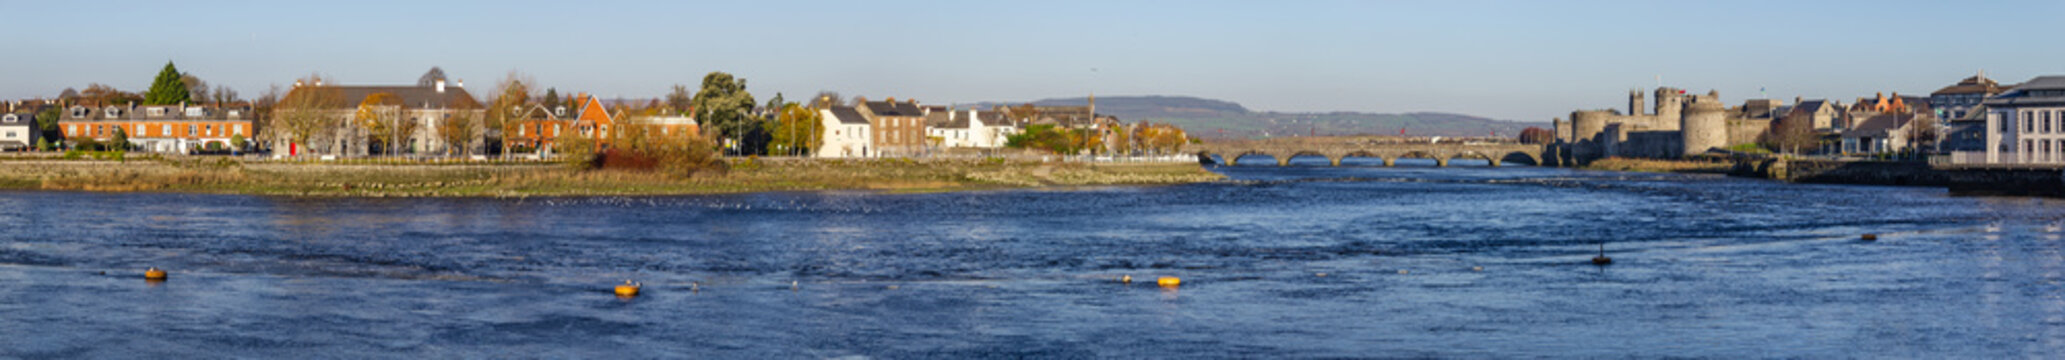 Panorama of Castle, stone bridge and Shannon river